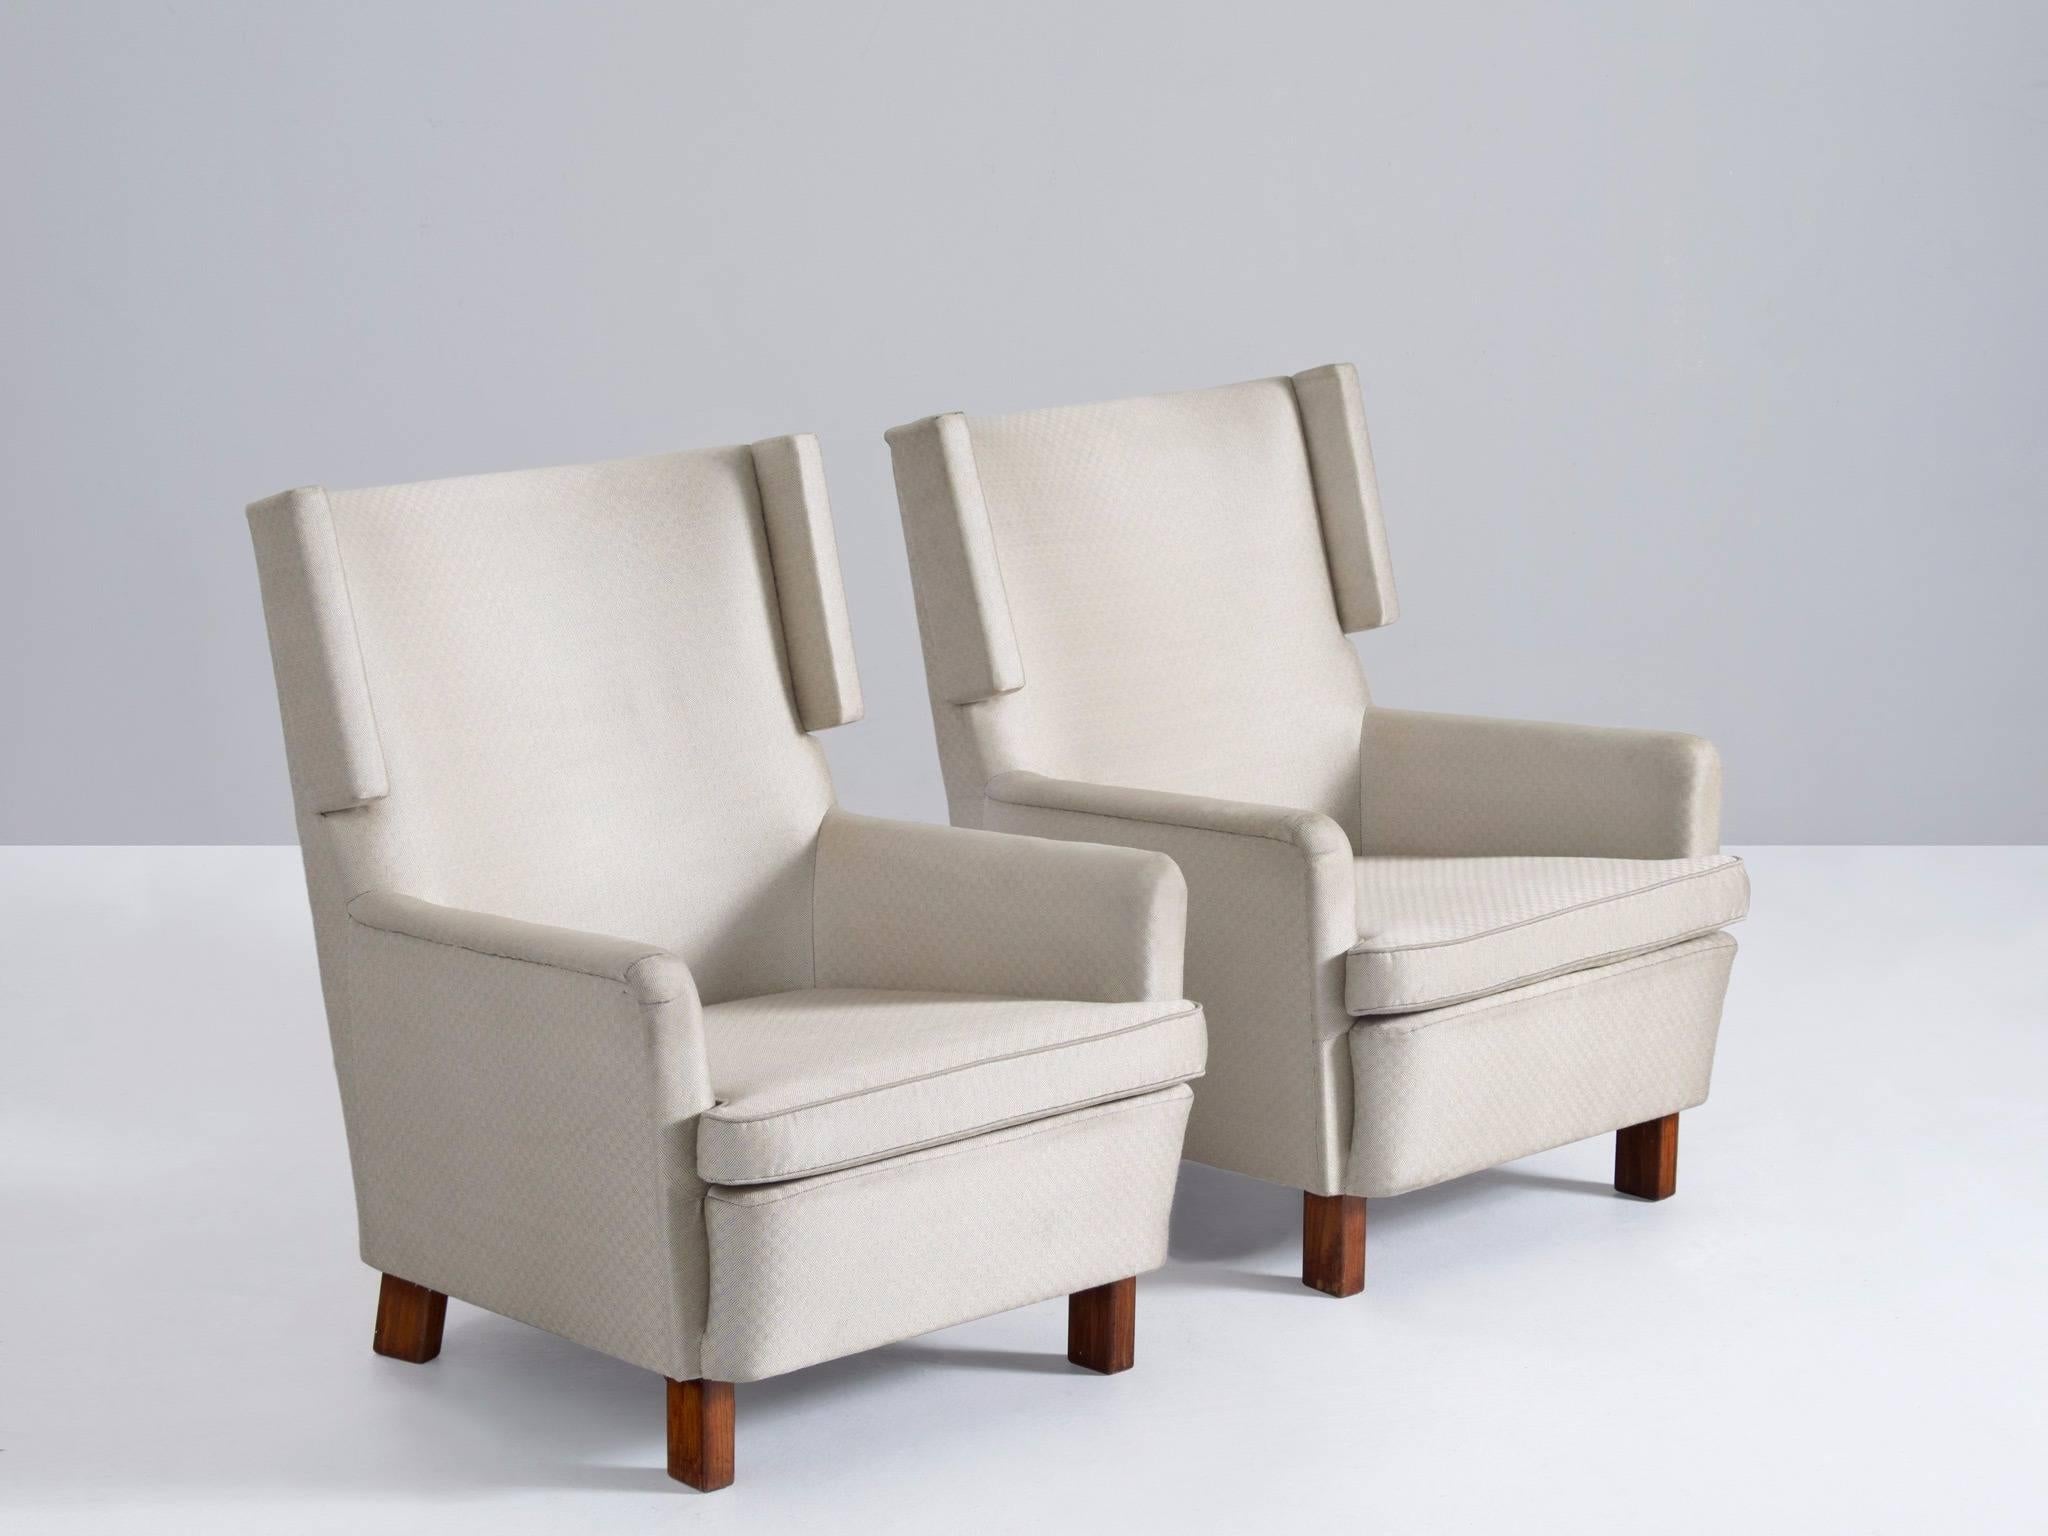 Pair of wingback chairs, fabric and wood, Sweden, 1960s.

Very nice designed pair of Swedish Mid-Century armchairs. Interesting shapes with nice wingback detail. The 'ears' correspond with the wooden legs of the chair. Comfortable lounge chair.